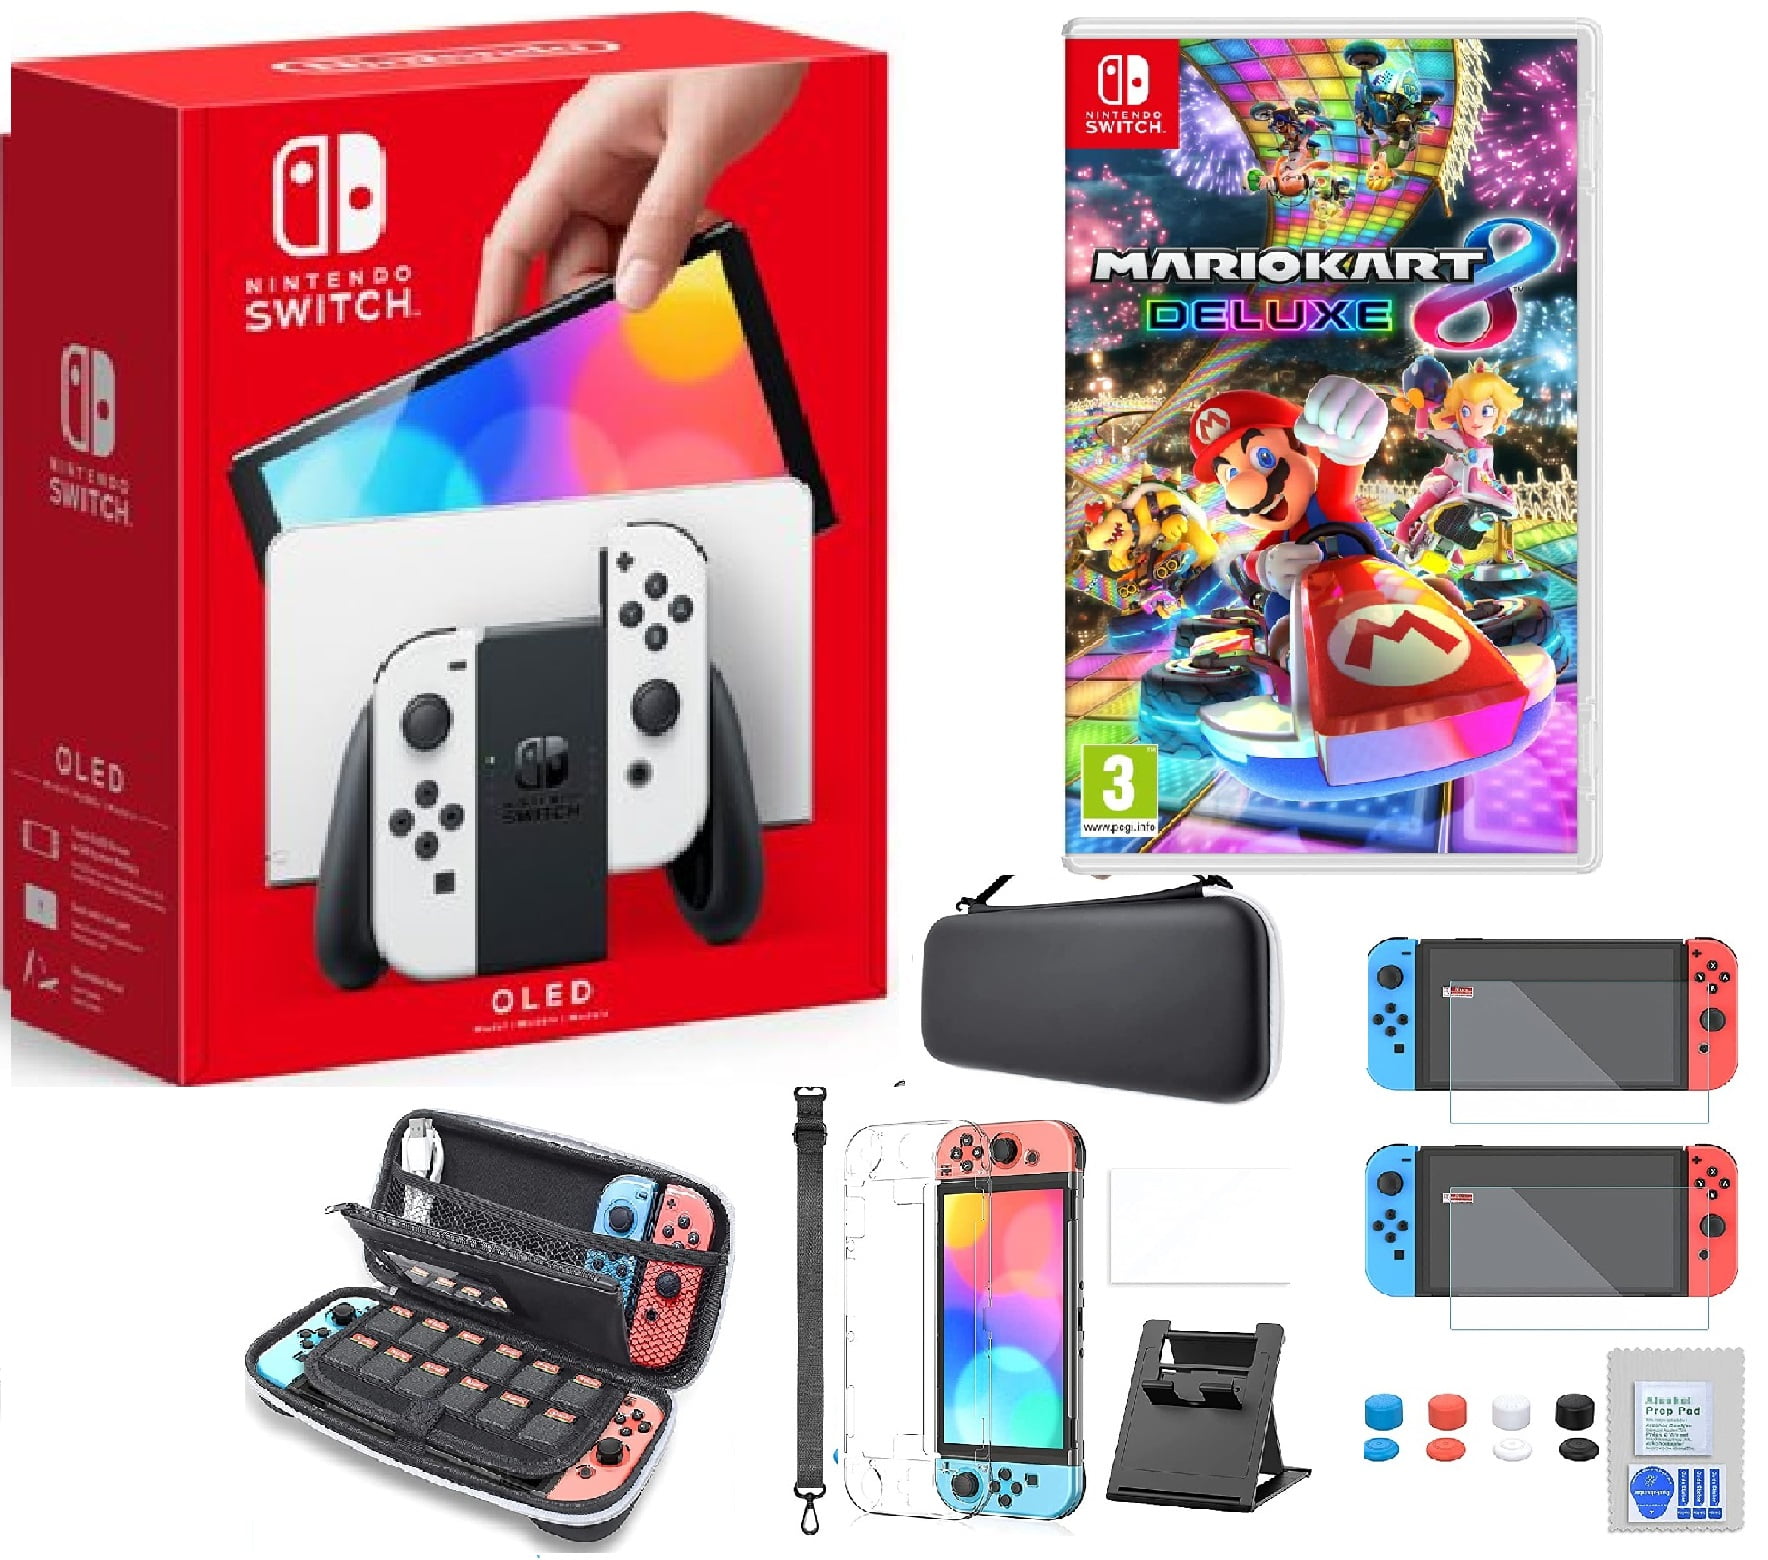 2022 Newest Nintendo Switch OLED Model White Joy Con 64GB Console Improved  HD Screen with Mario Kart 8 Deluxe Game and 15-1 TKX Accessories KIT -  